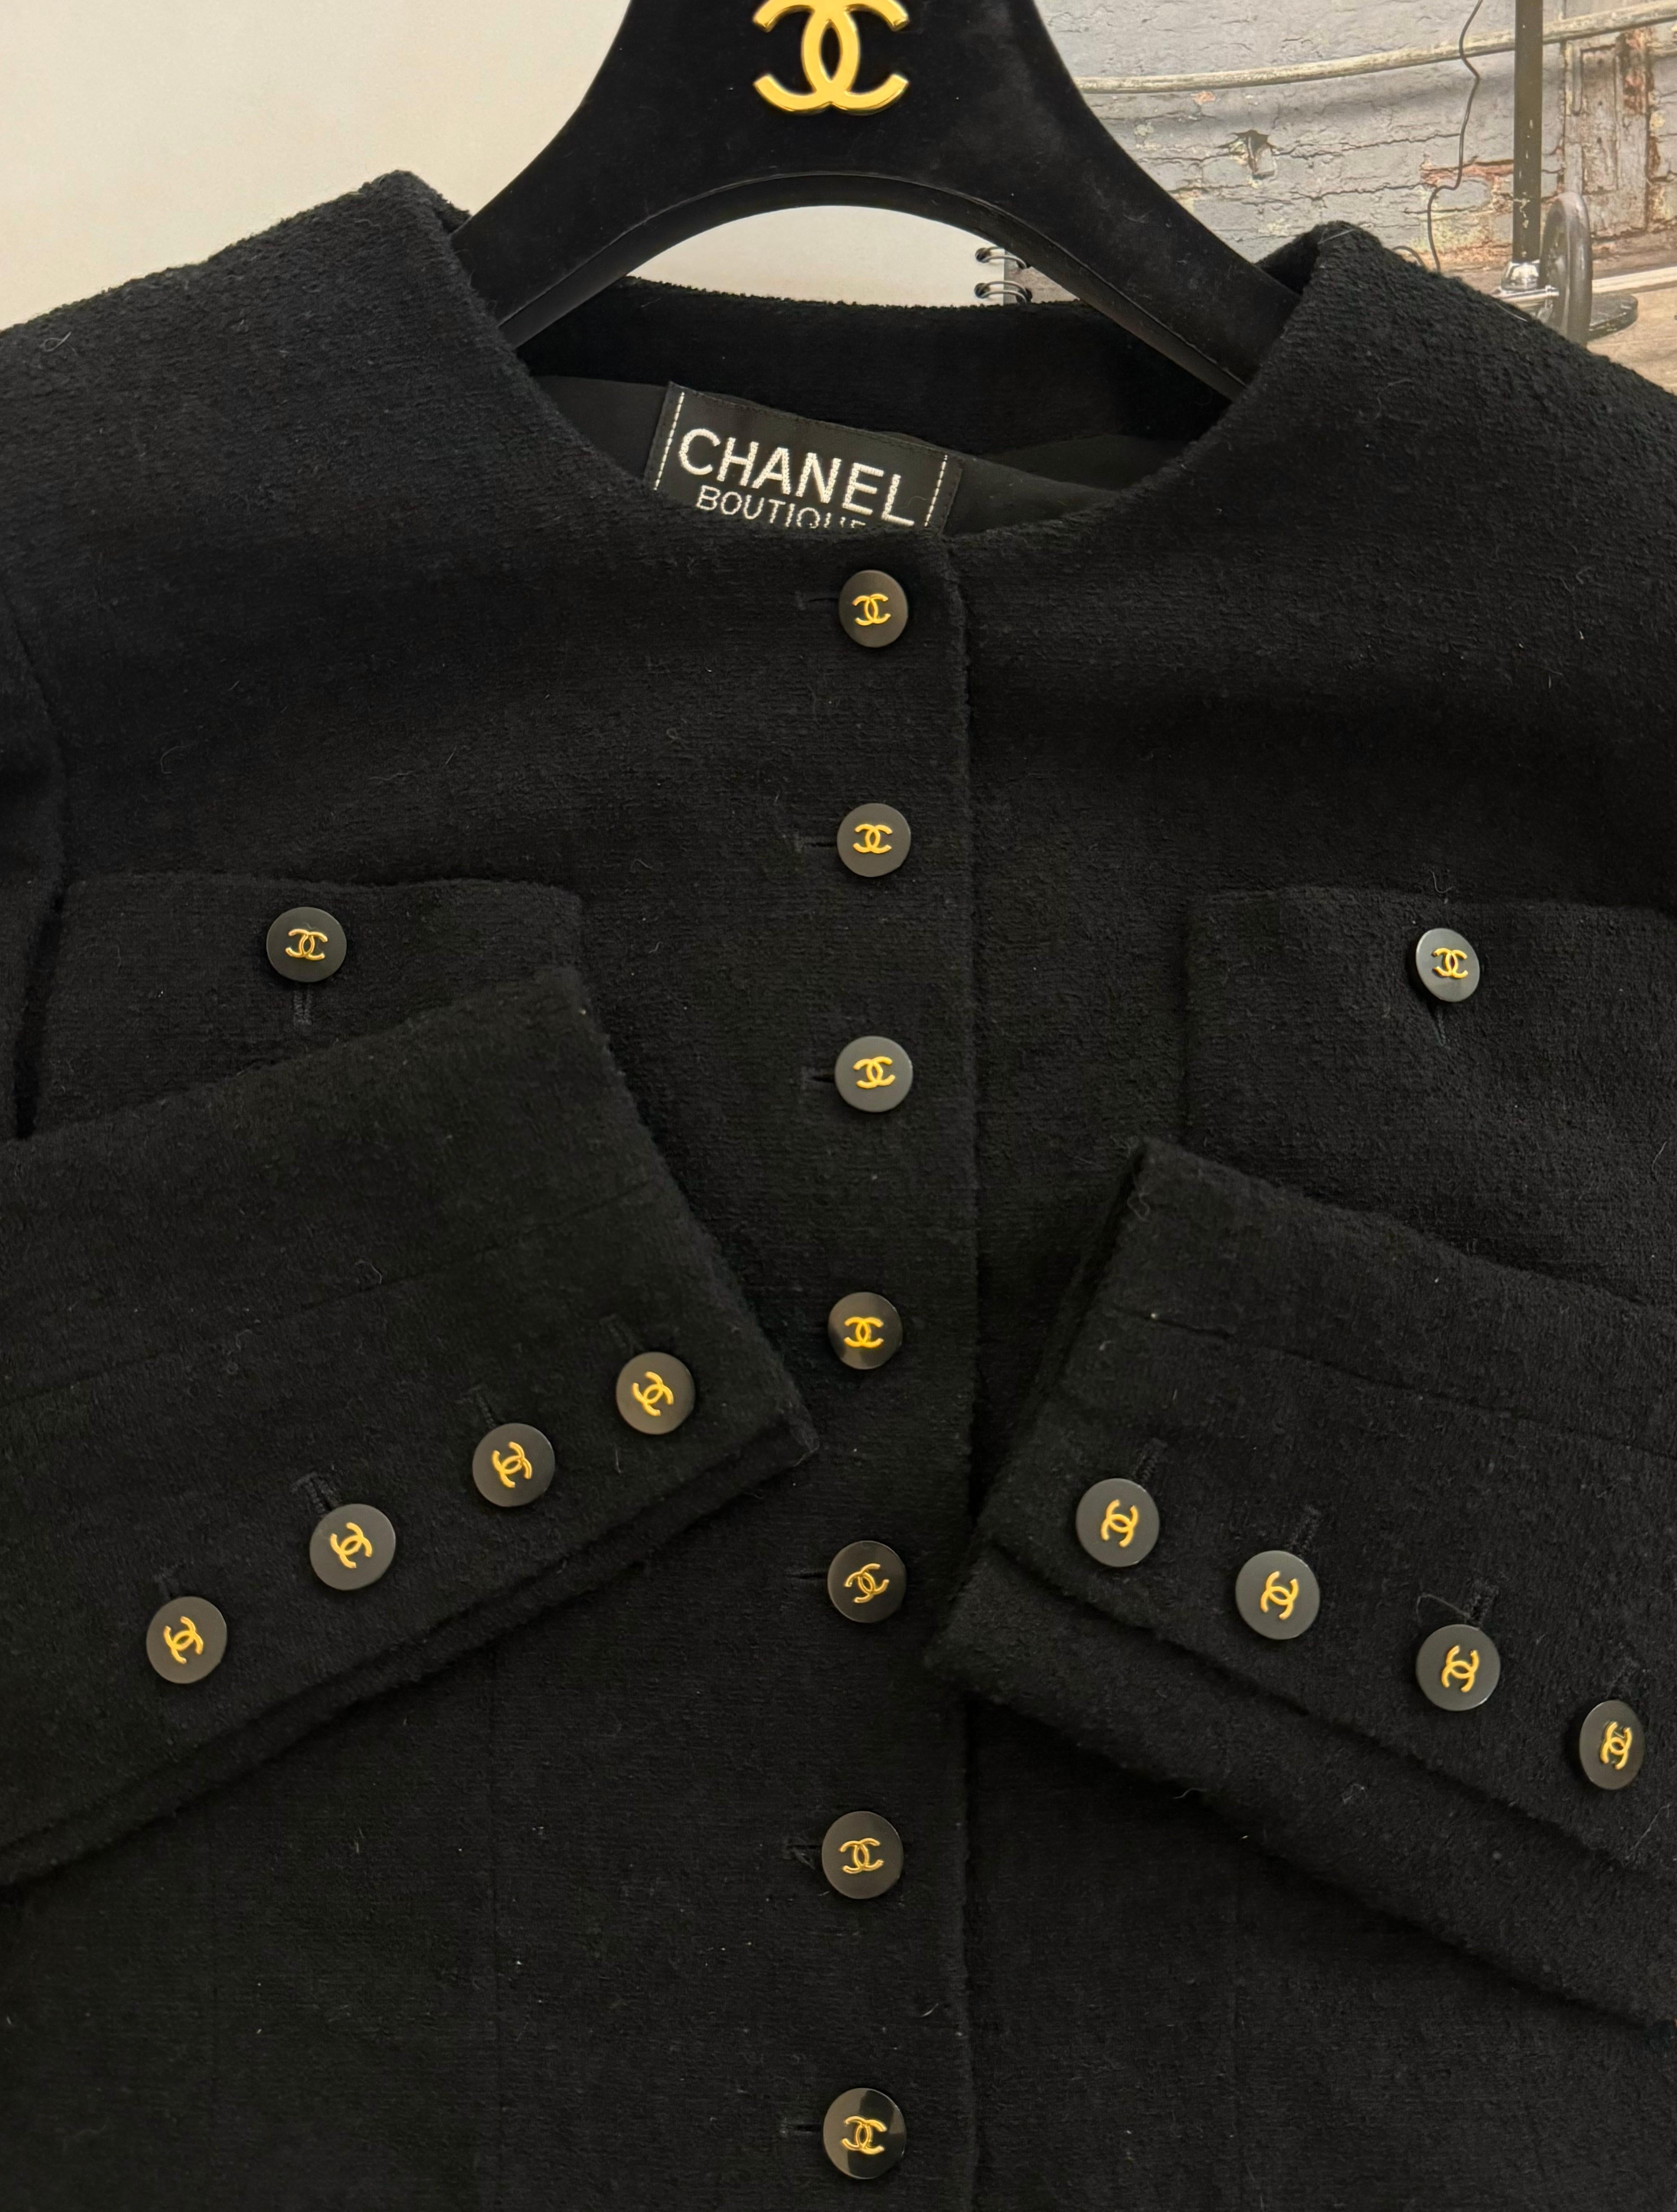 Rare and collector Chanel Runway Spring Summer 1995 Barbie collection black wool CC logo buttons jacket, no size tag it fits perfectly for a size 36 FR and 38 FR, very good condition